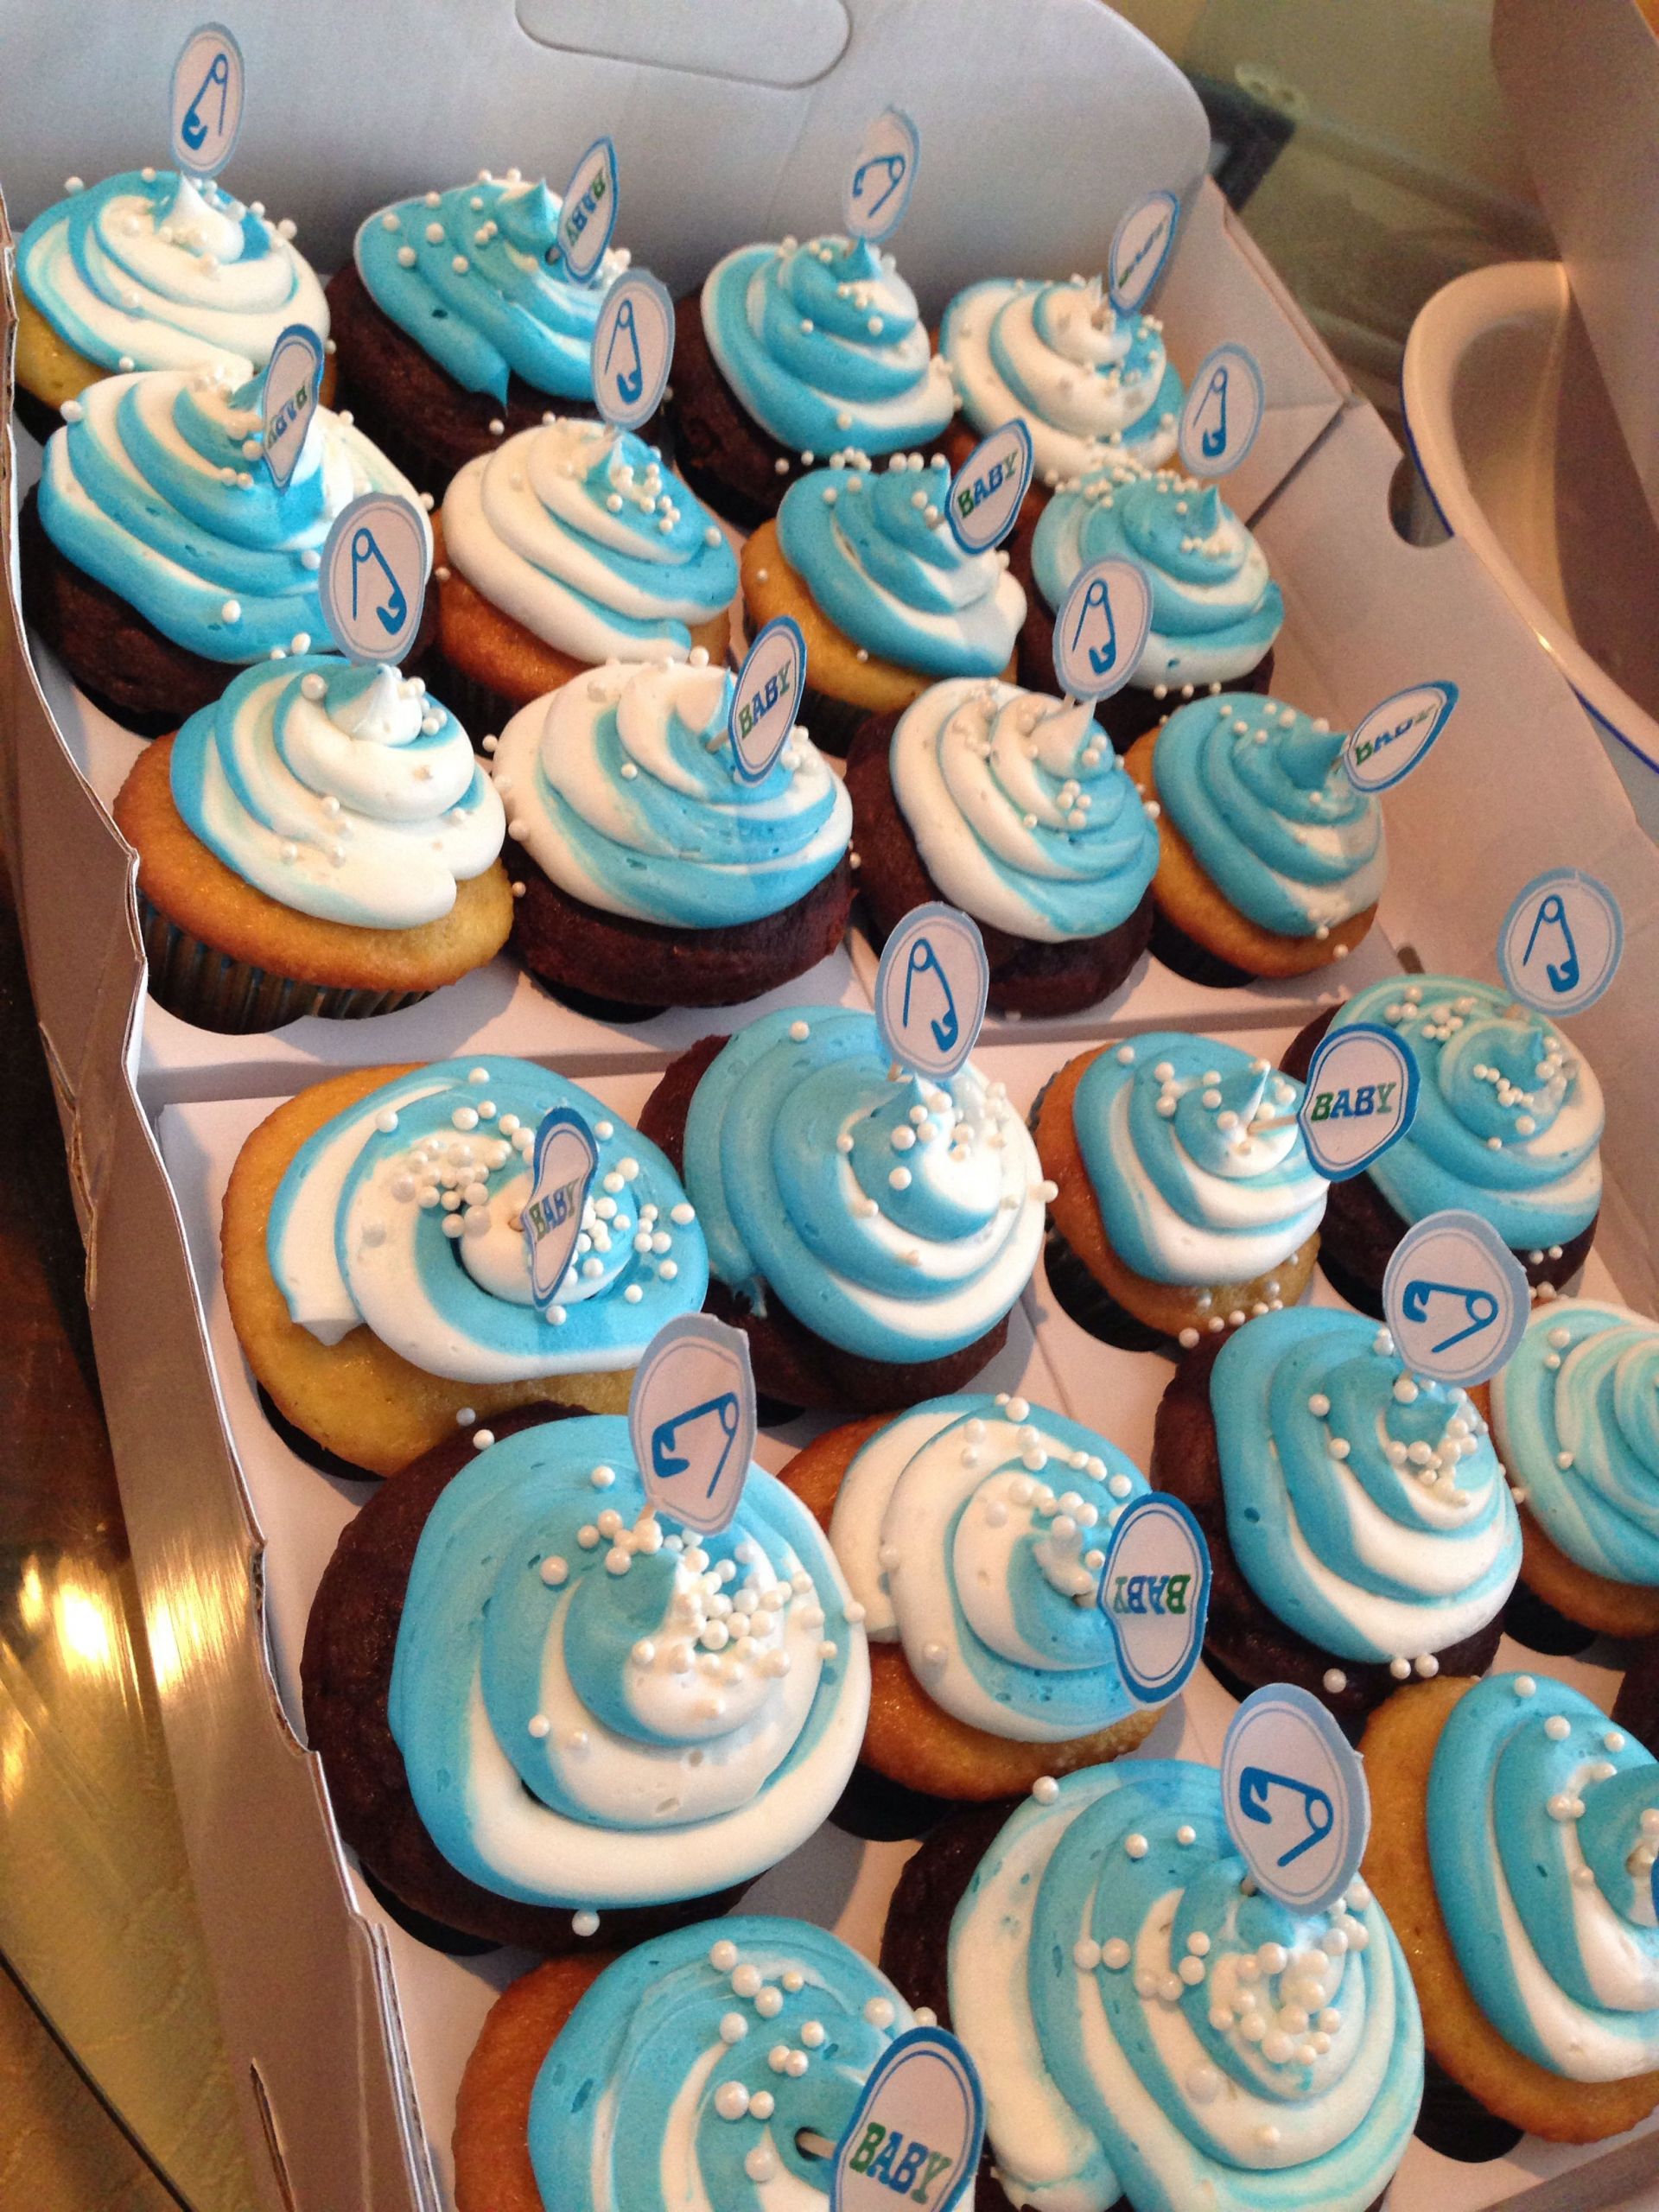 Baby Boy Shower Cupcakes
 Baby boy baby shower cupcakes Baby